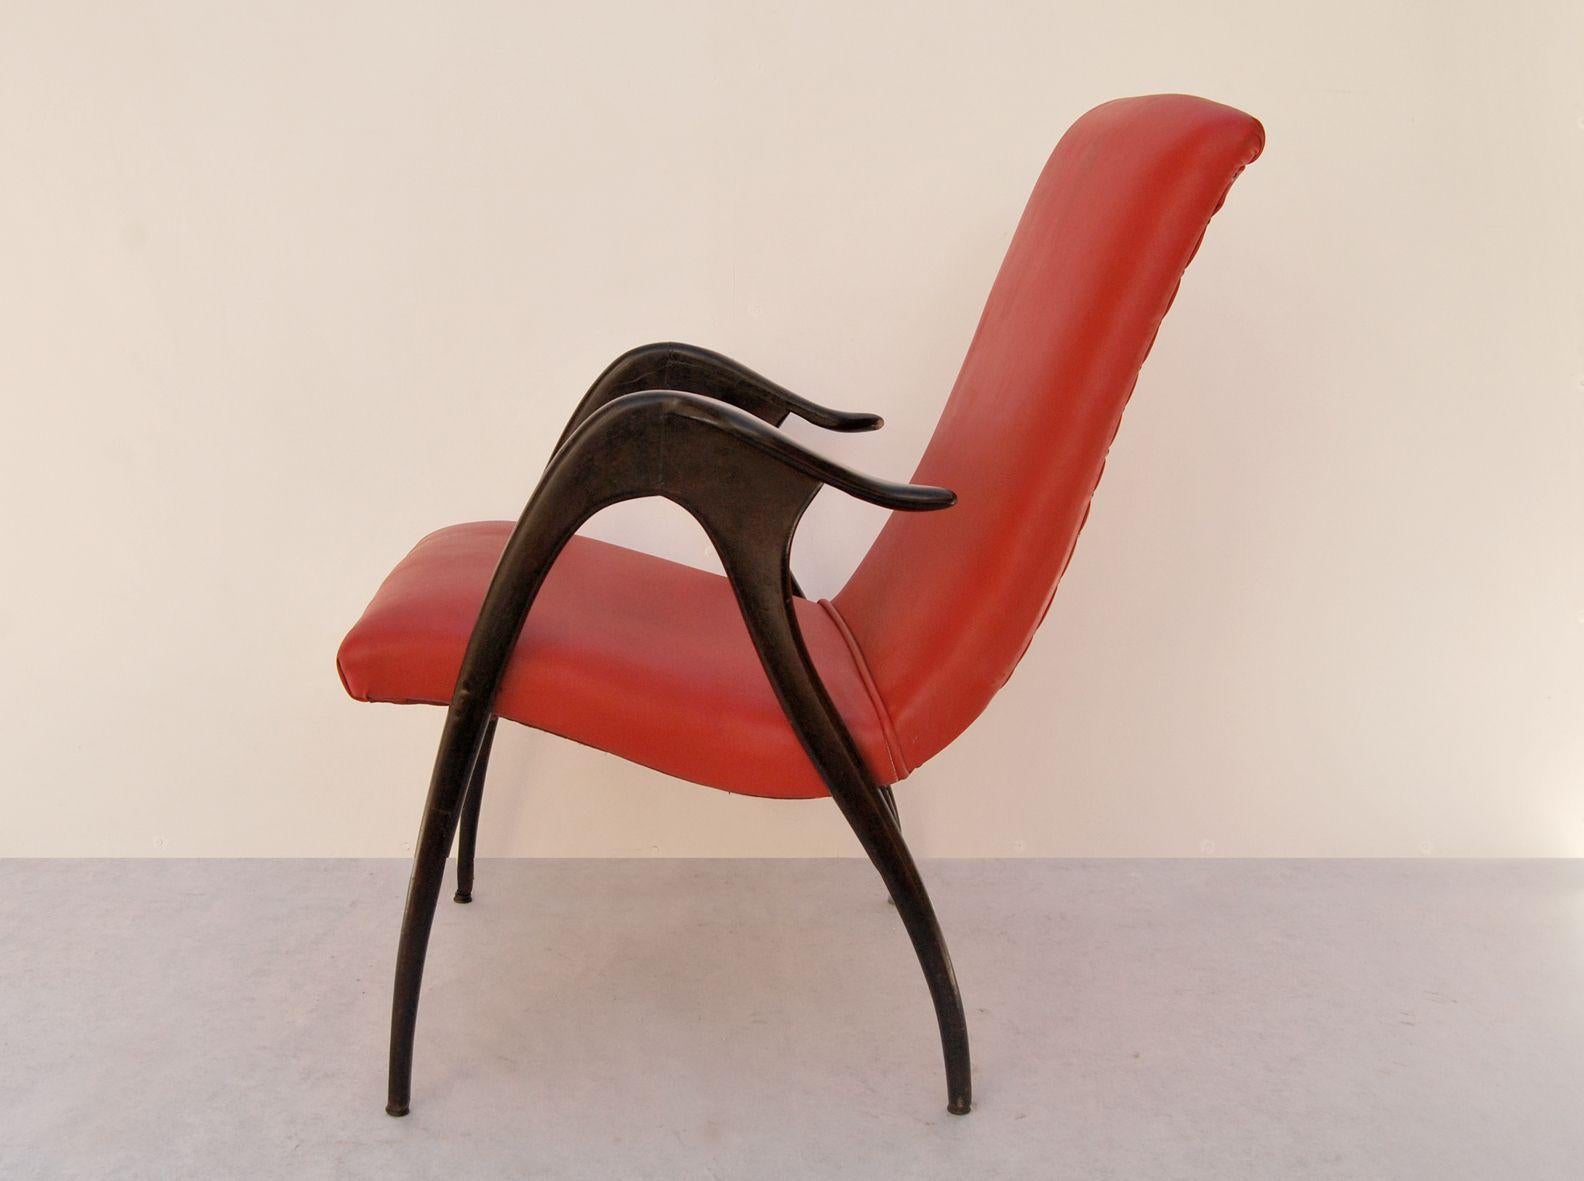 Malatesta and Mason armchair, 1950s, Made in Italy. 
Ebonized wood armchair with original patina of the period. The fabric of the armchair is red faux leather and is original. This seat was designed by Malatesta and Mason and produced in Italy in